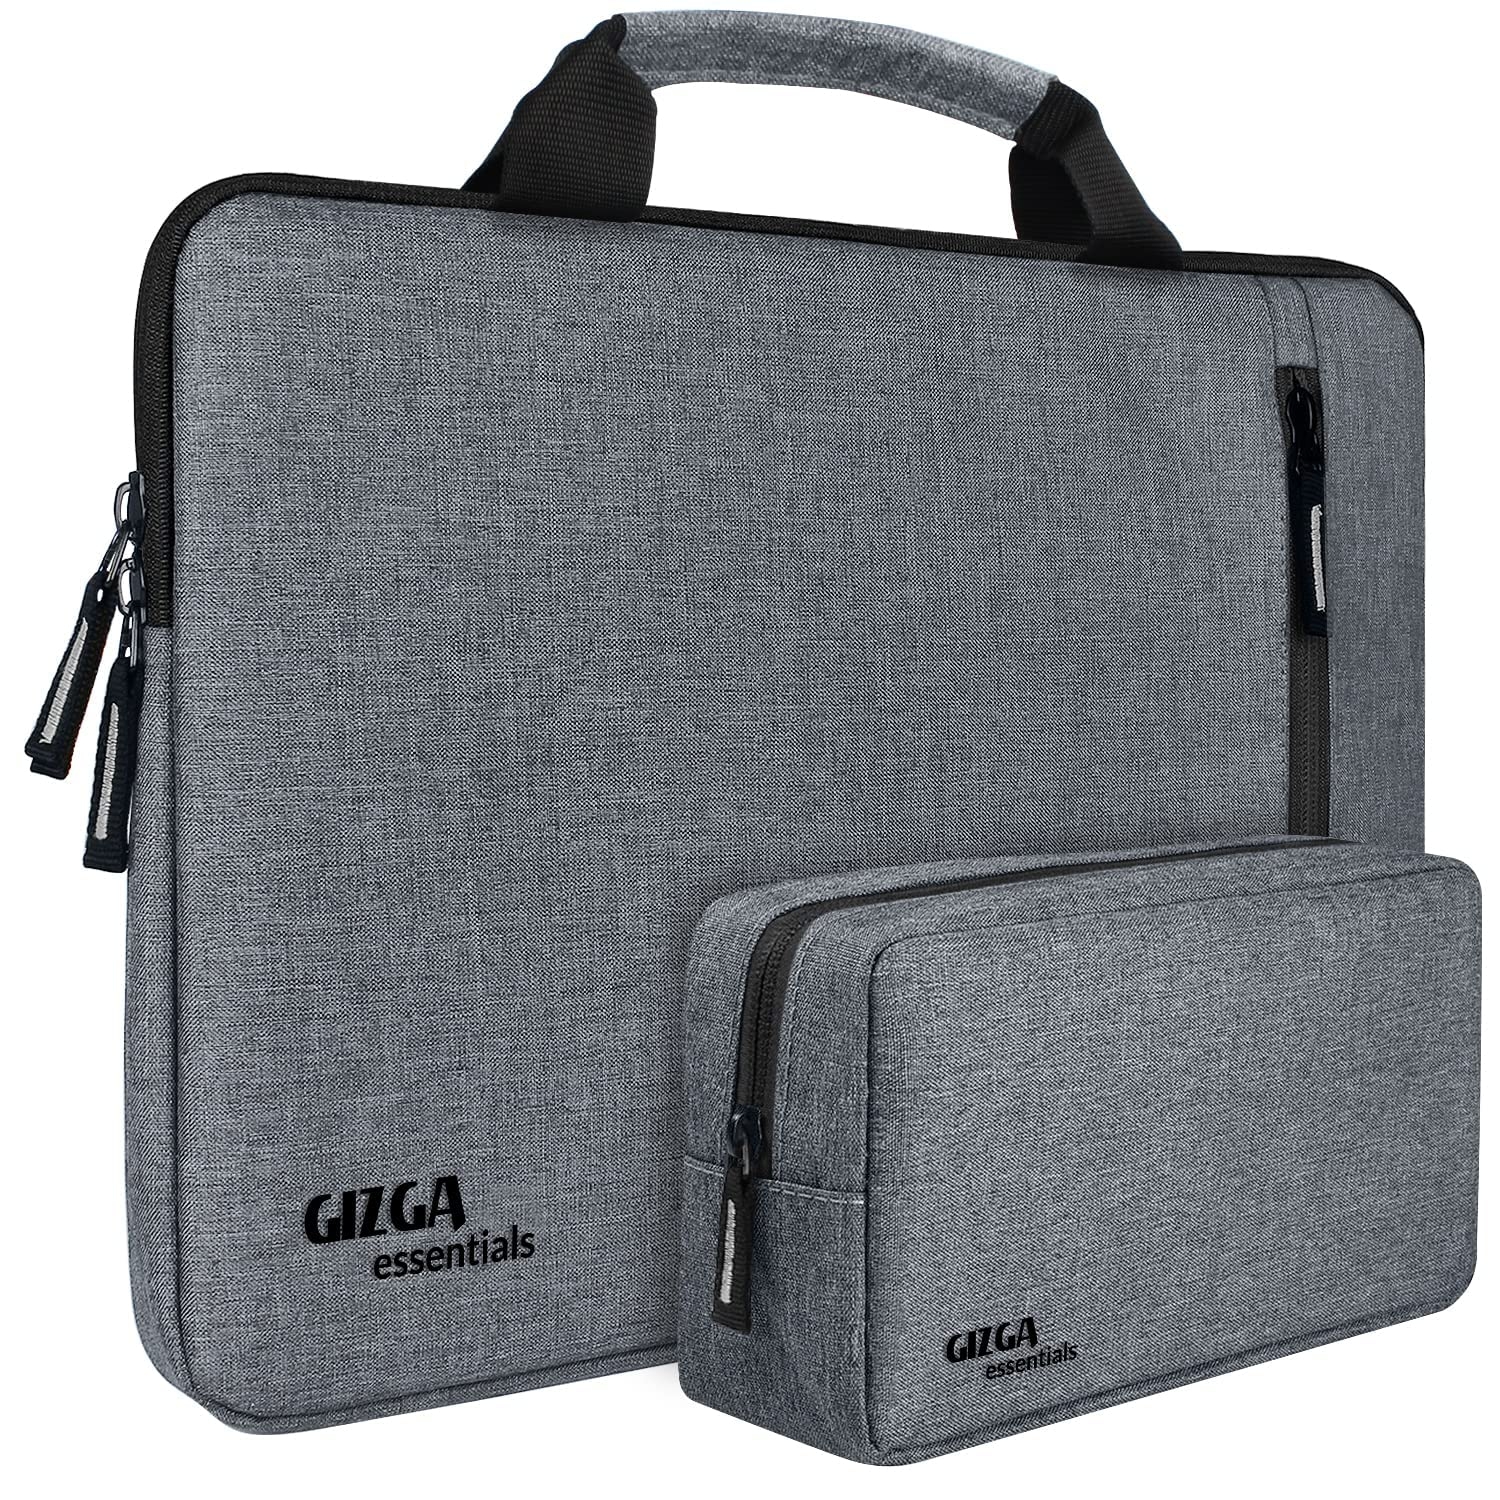 Gizga Essentials 14.1 Inch Laptop Bag Sleeve Case Nylon Fabric Cover with Handle